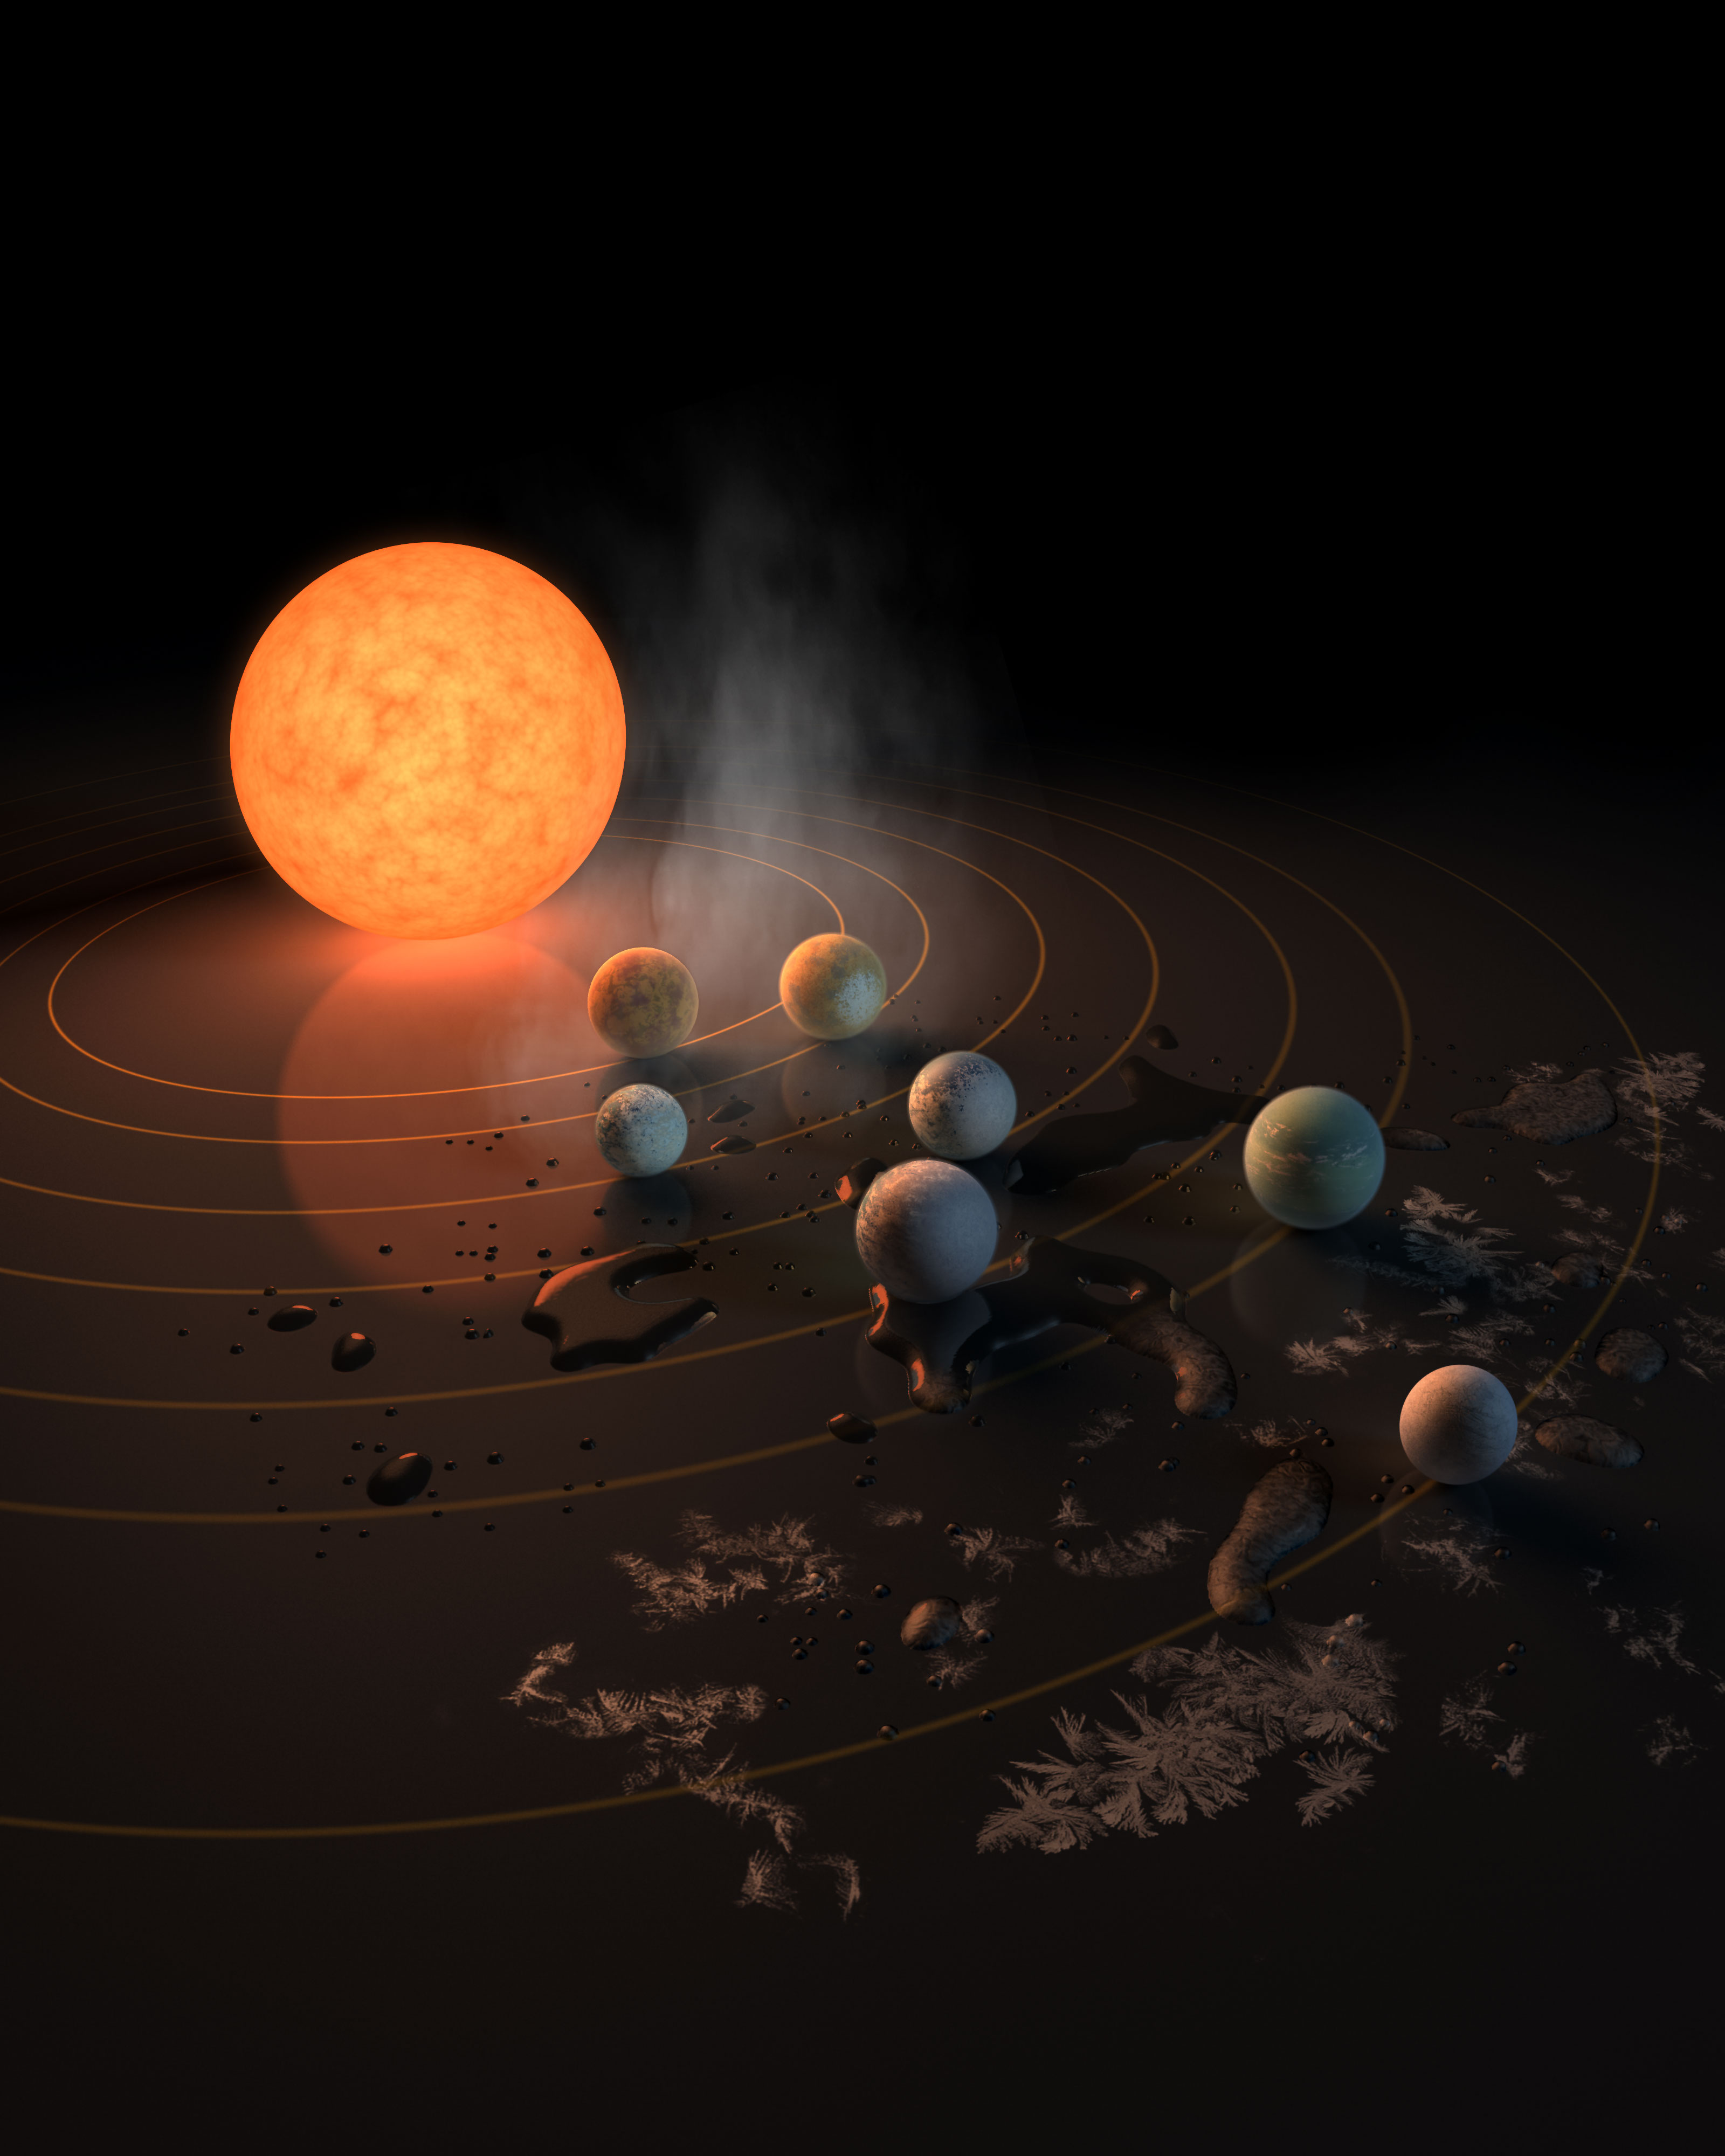 The TRAPPIST-1 star, an ultra-cool dwarf, has seven Earth-size planets orbiting it. This artist's concept appeared on the cover of the journal Nature on Feb. 23, 2017. 